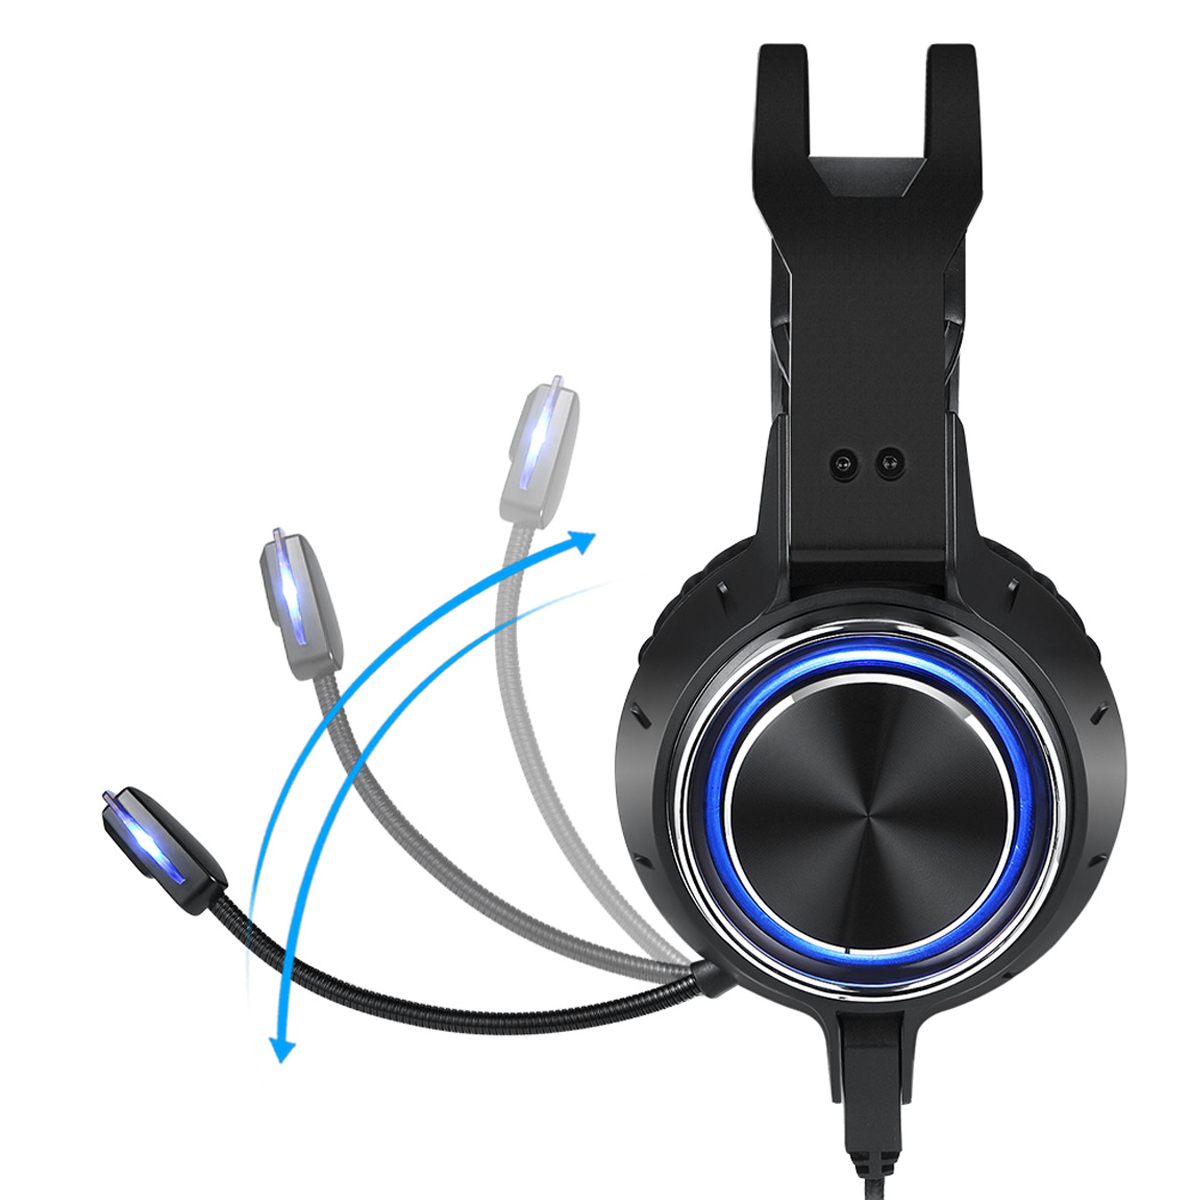 Find Bakeey Wired Stereo Bass Surround Noise Reduction Gaming Headset with Mic for PS4 New for Xbox One PC for Sale on Gipsybee.com with cryptocurrencies